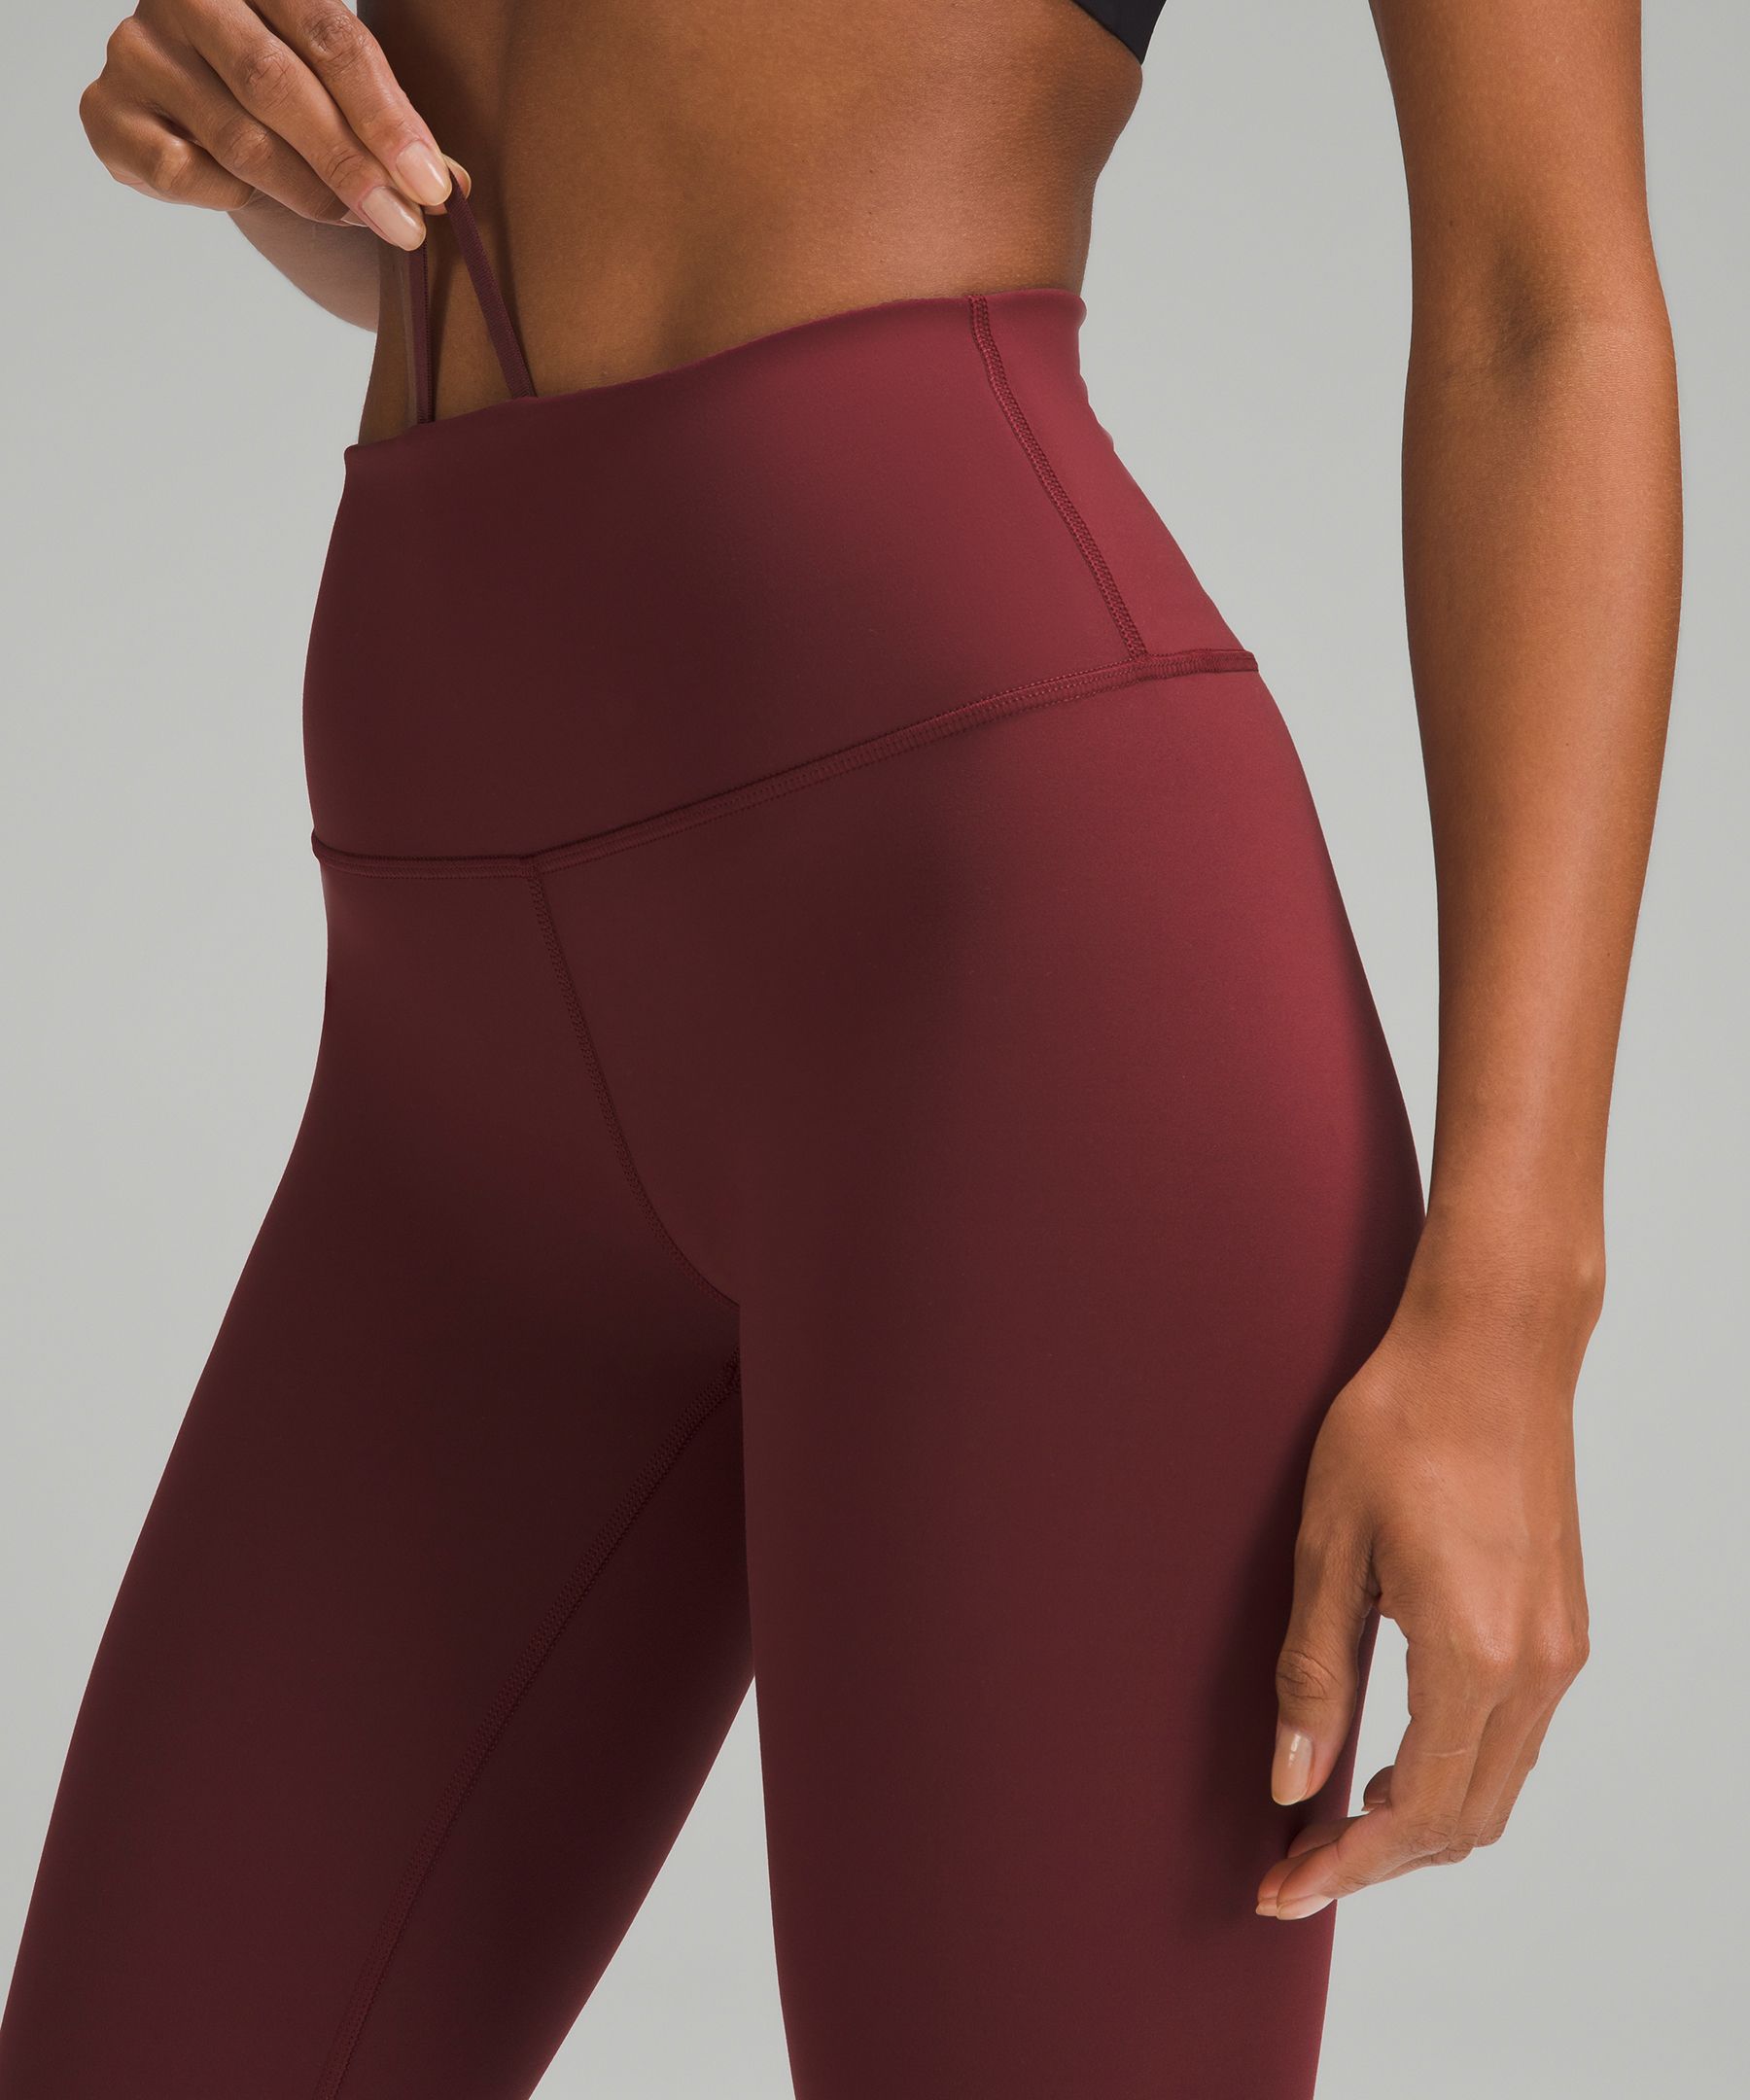 Lululemon Leggings Wunder Under Tight High-Rise Crop 25” Shine Size 8 - La  Paz County Sheriff's Office Dedicated to Service